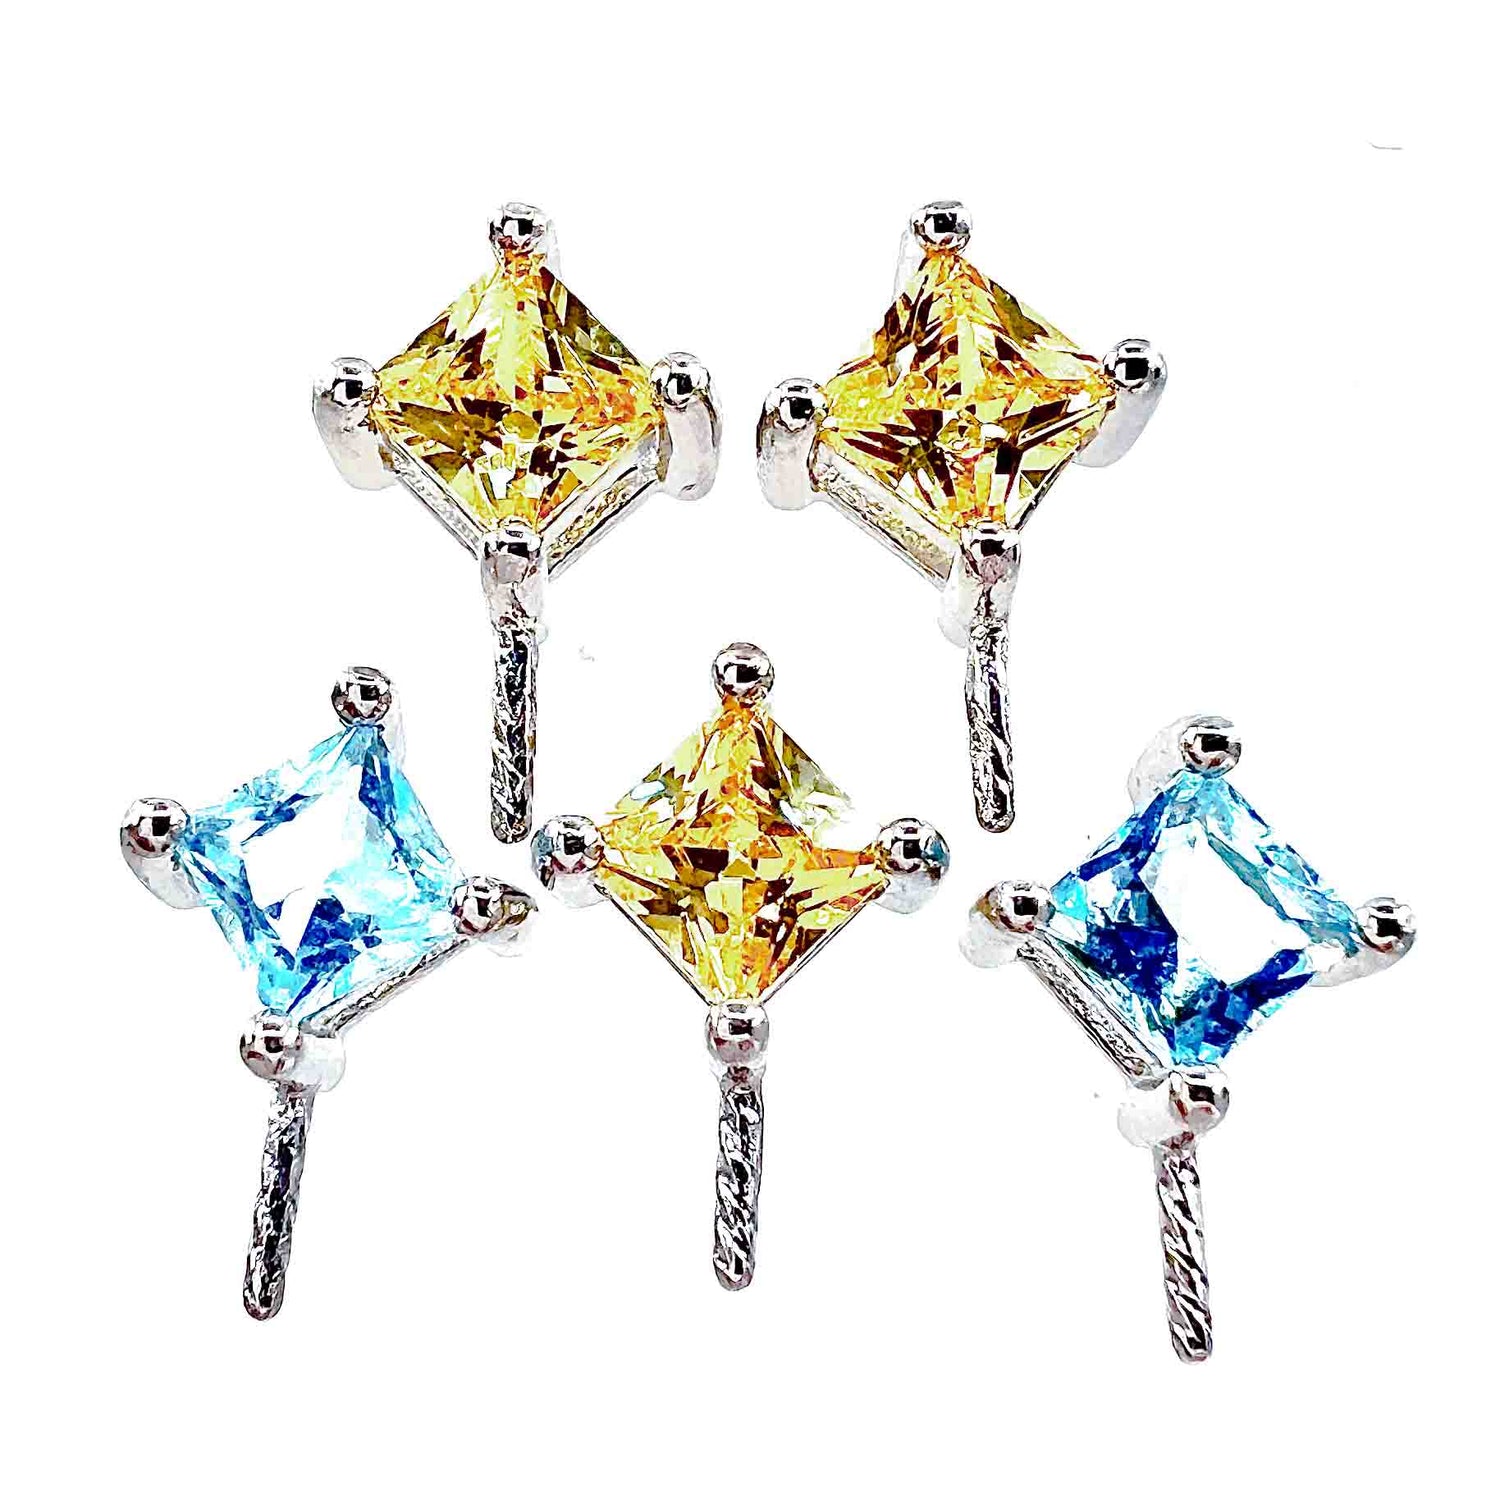 DIY Mount Pendant - 925 Sterling Silver Yellow and Blue Rhinestones (5 Pack)